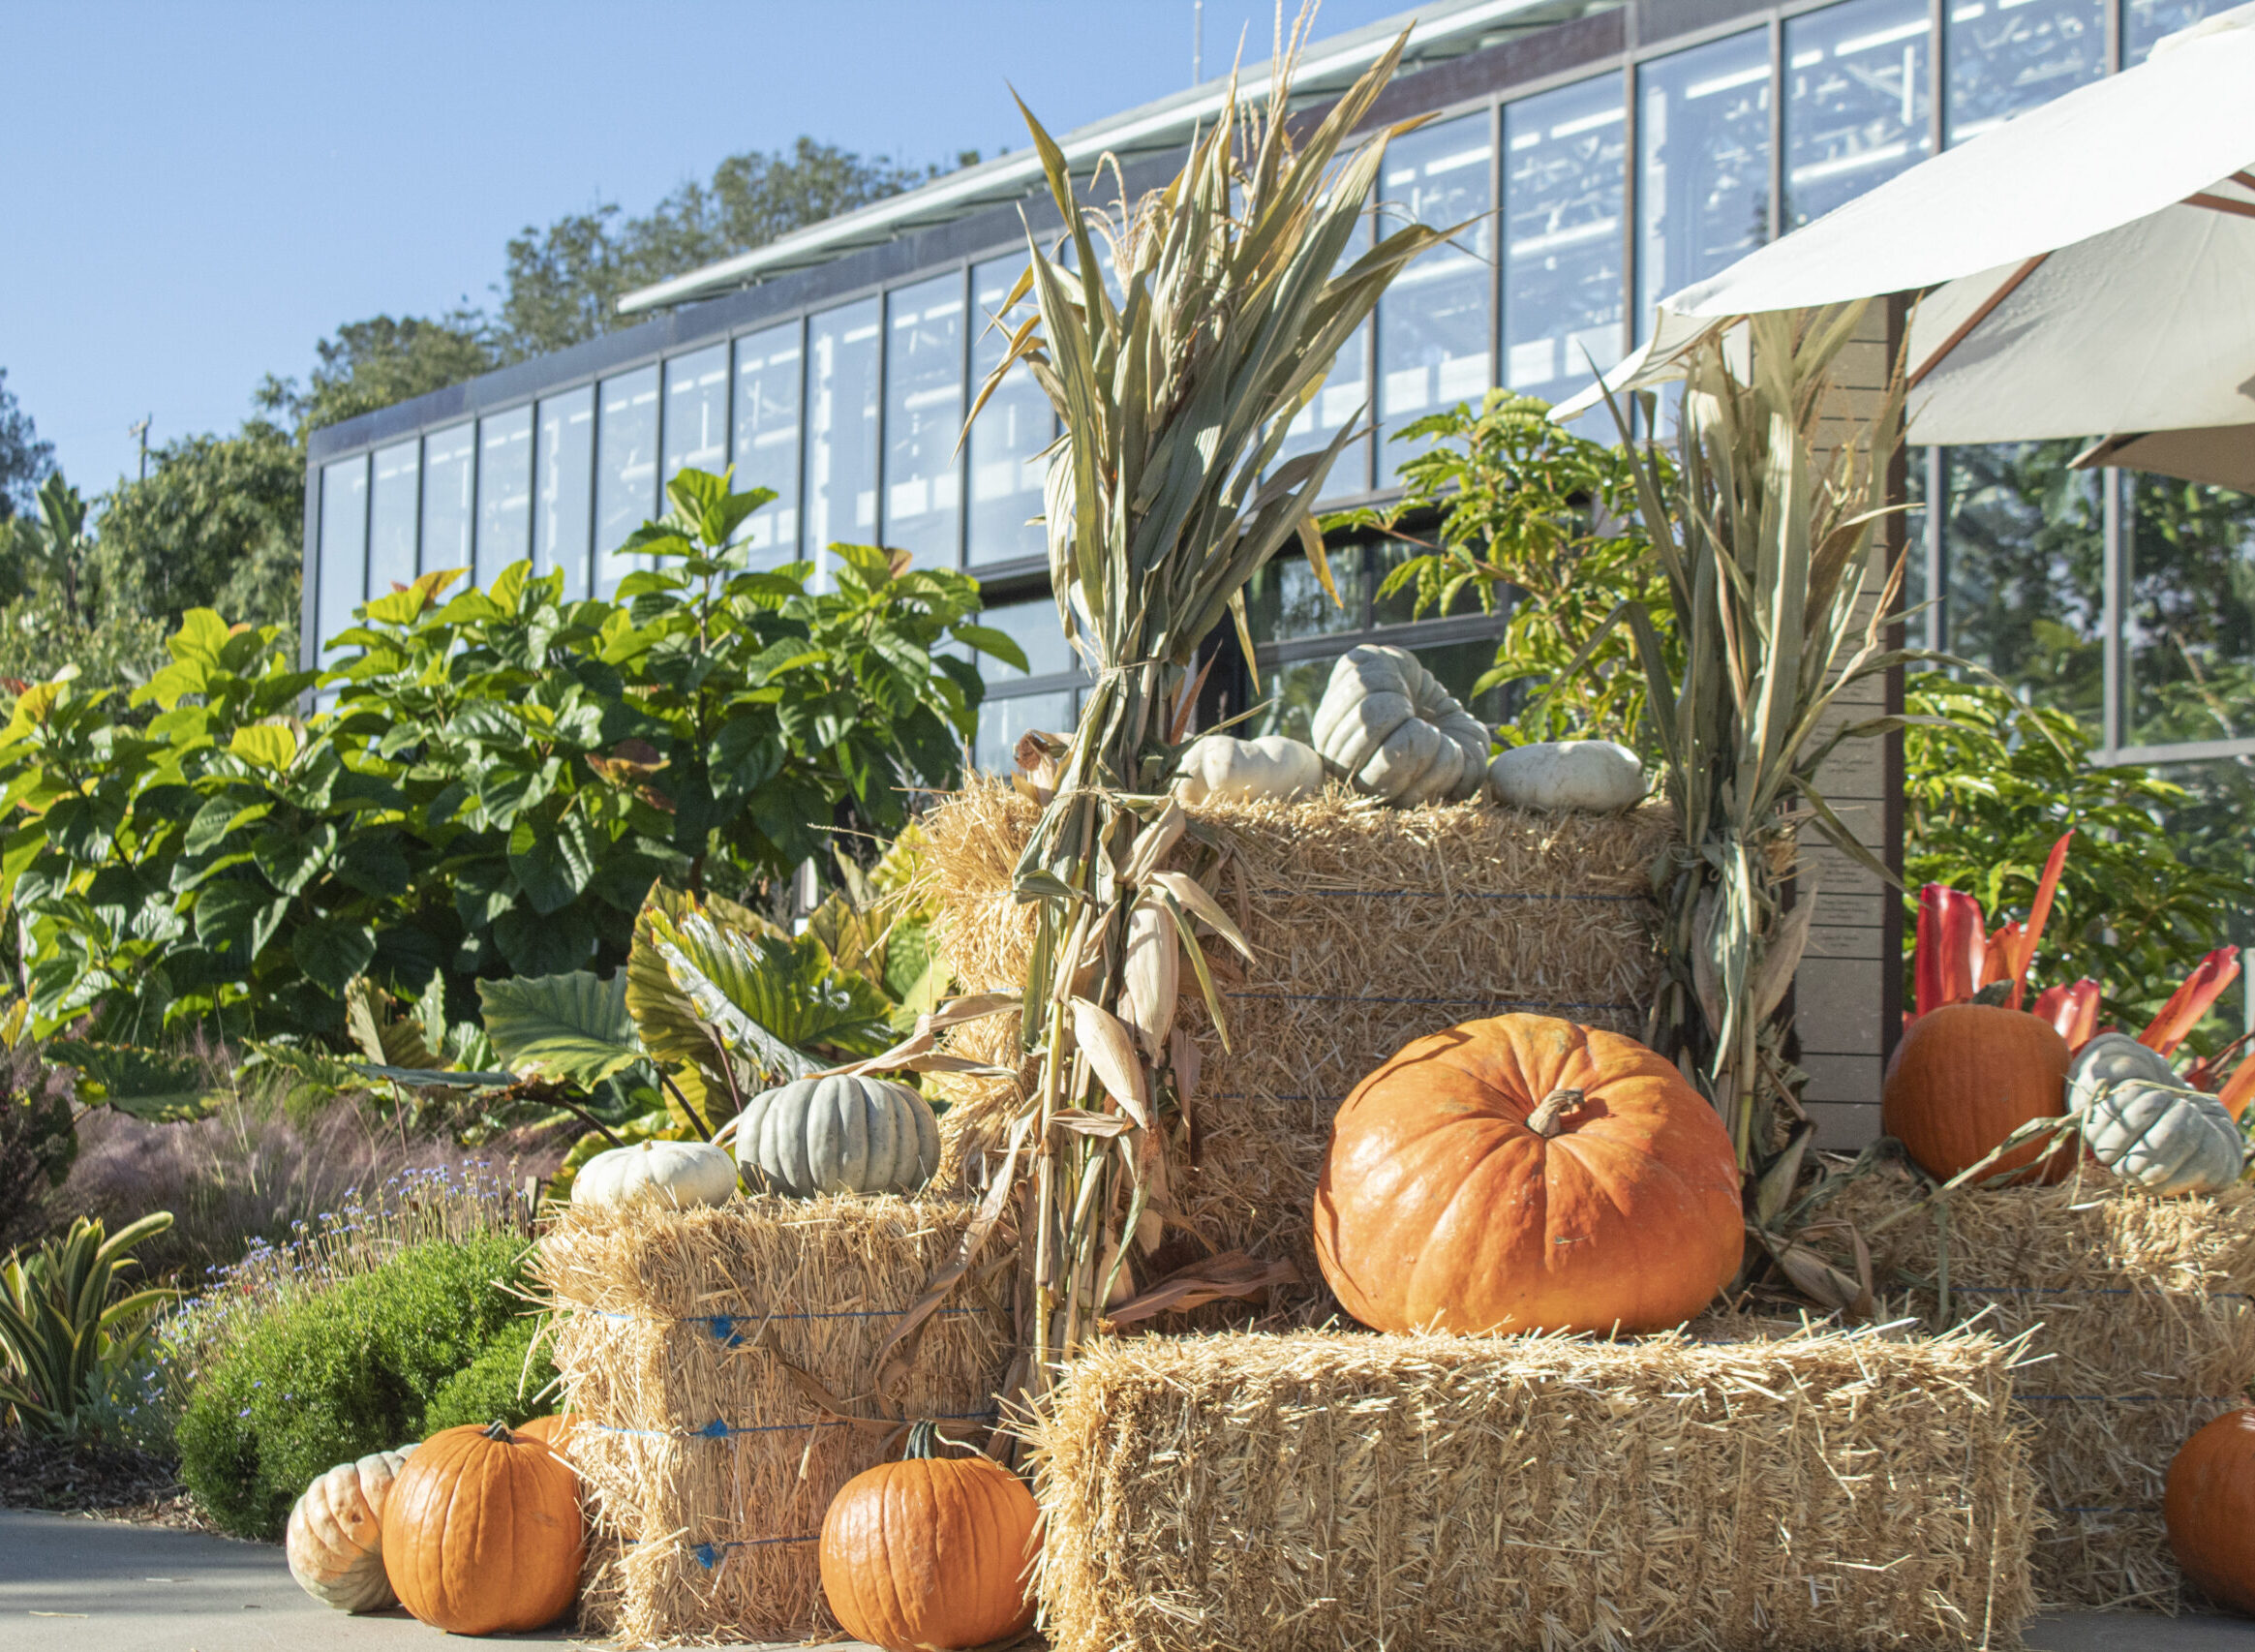 Pumpkins, hay bales, and corn stalks decorated at entrance of Conservatory